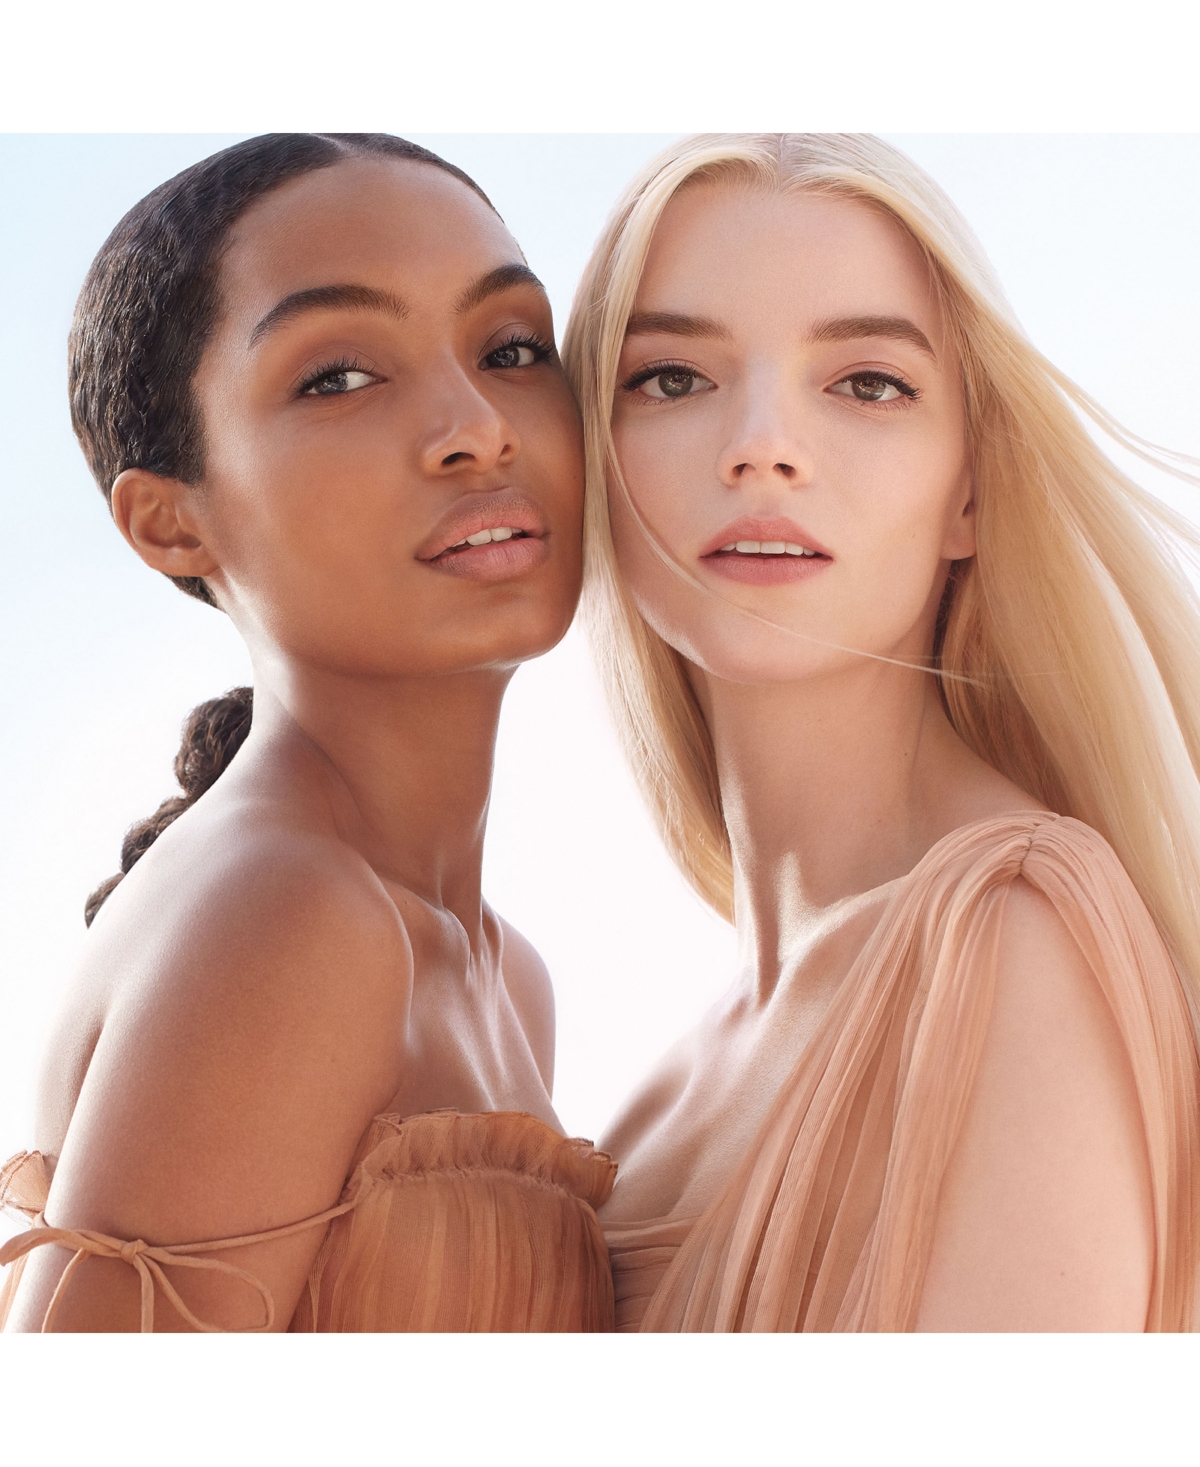 Shop Dior Forever Matte Skincare Foundation Spf 15 In Cool Rosy (light Skin With Cool Rosy Und